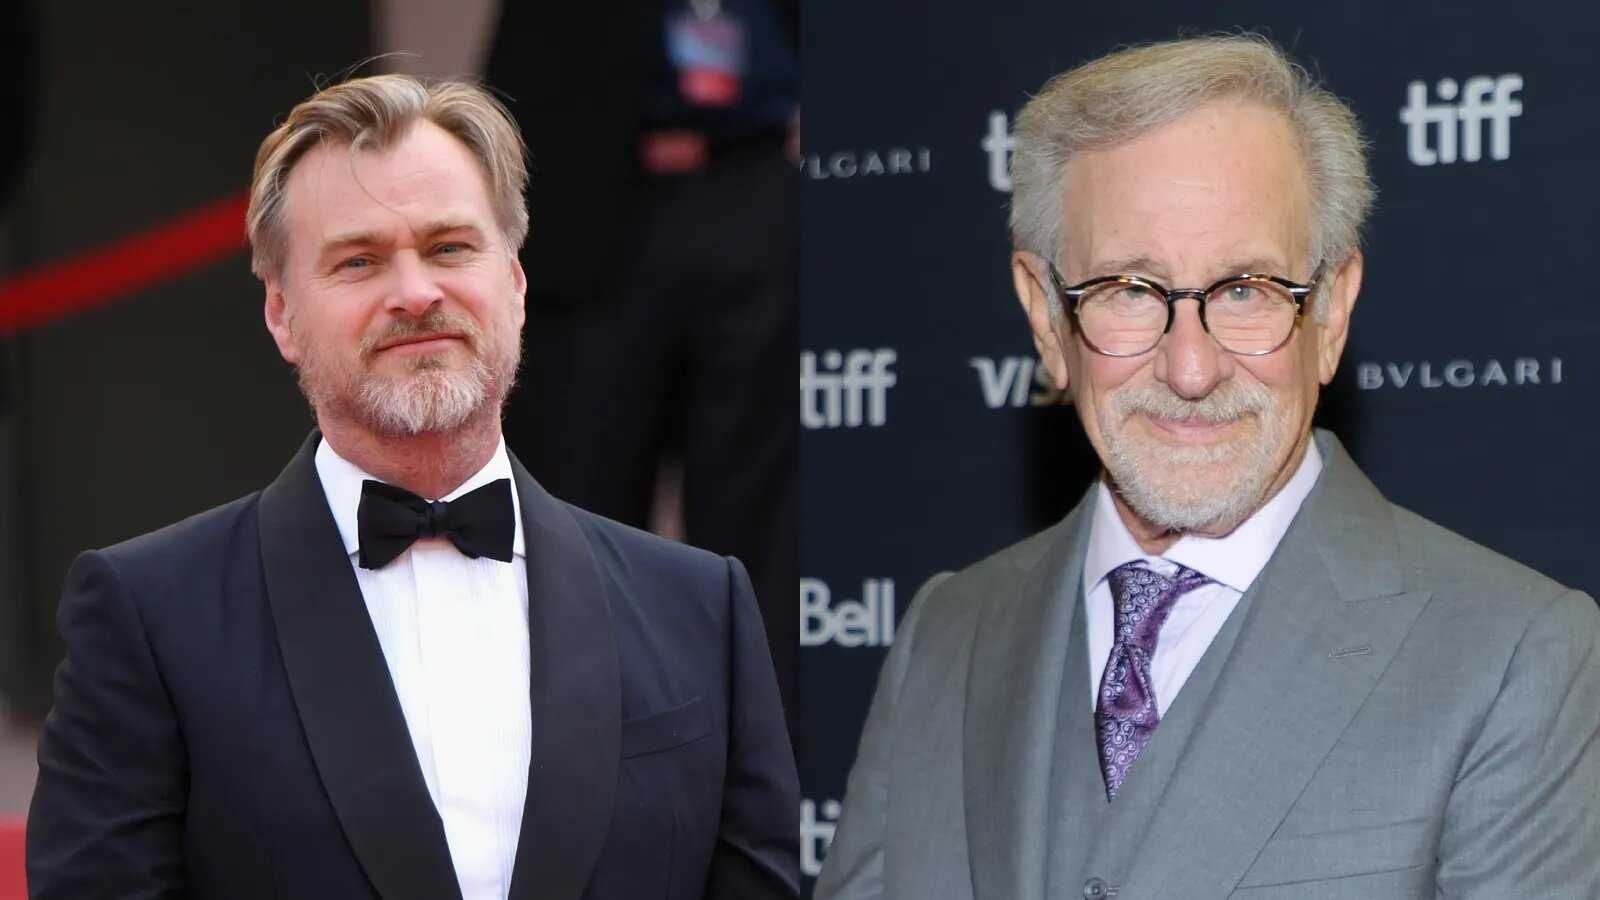 Christopher Nolan and Steven Spielberg (Source: We Got This Covered)